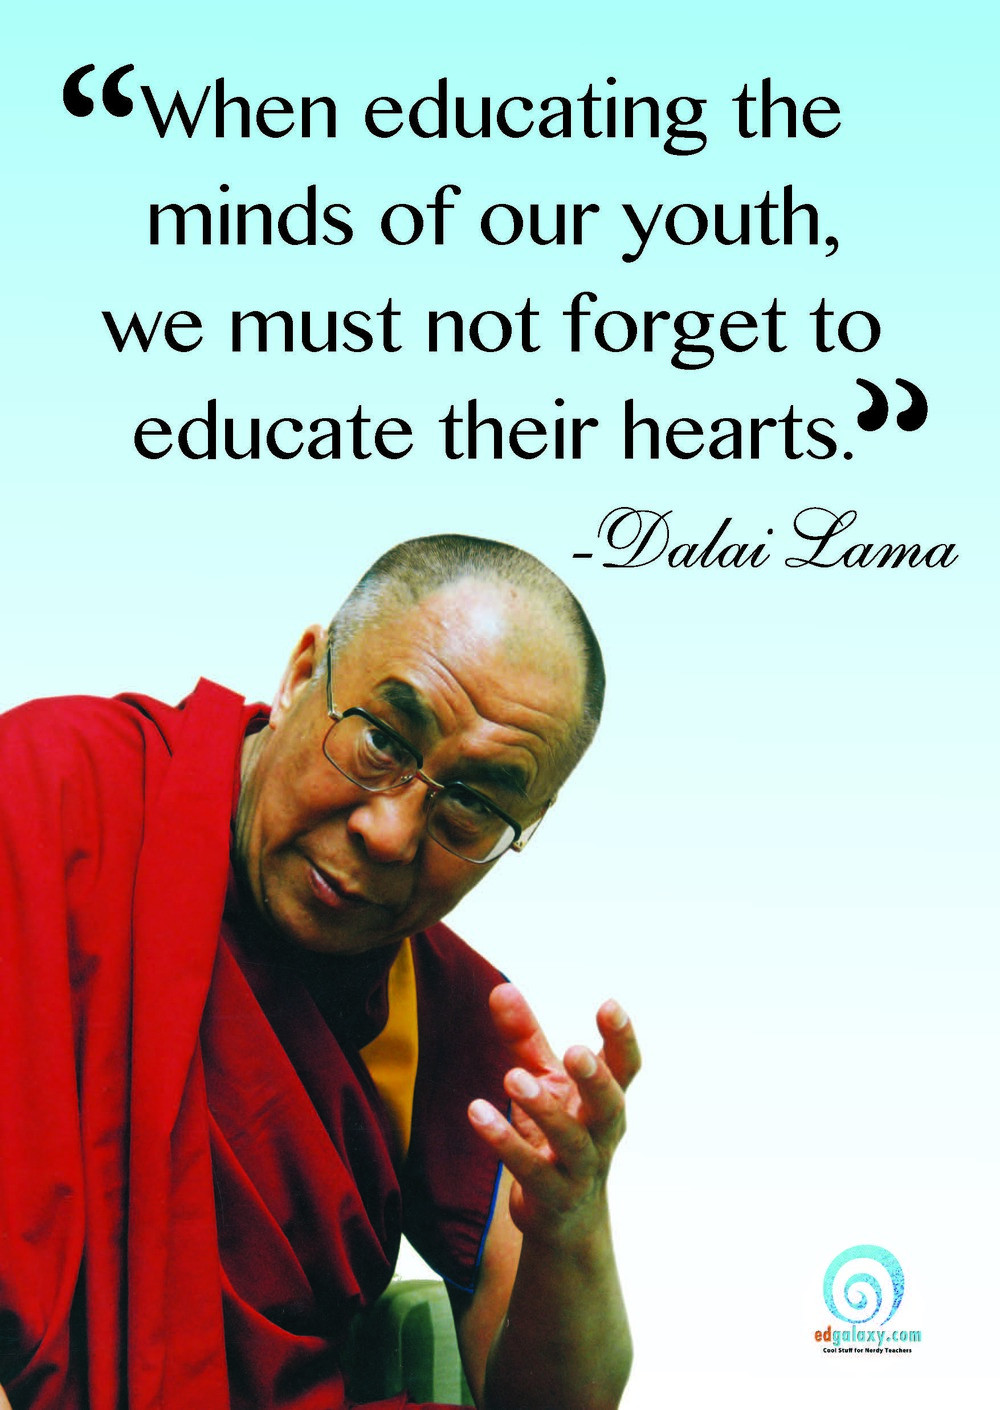 Quotes For Education
 Education Quotes Famous Quotes for teachers and Students